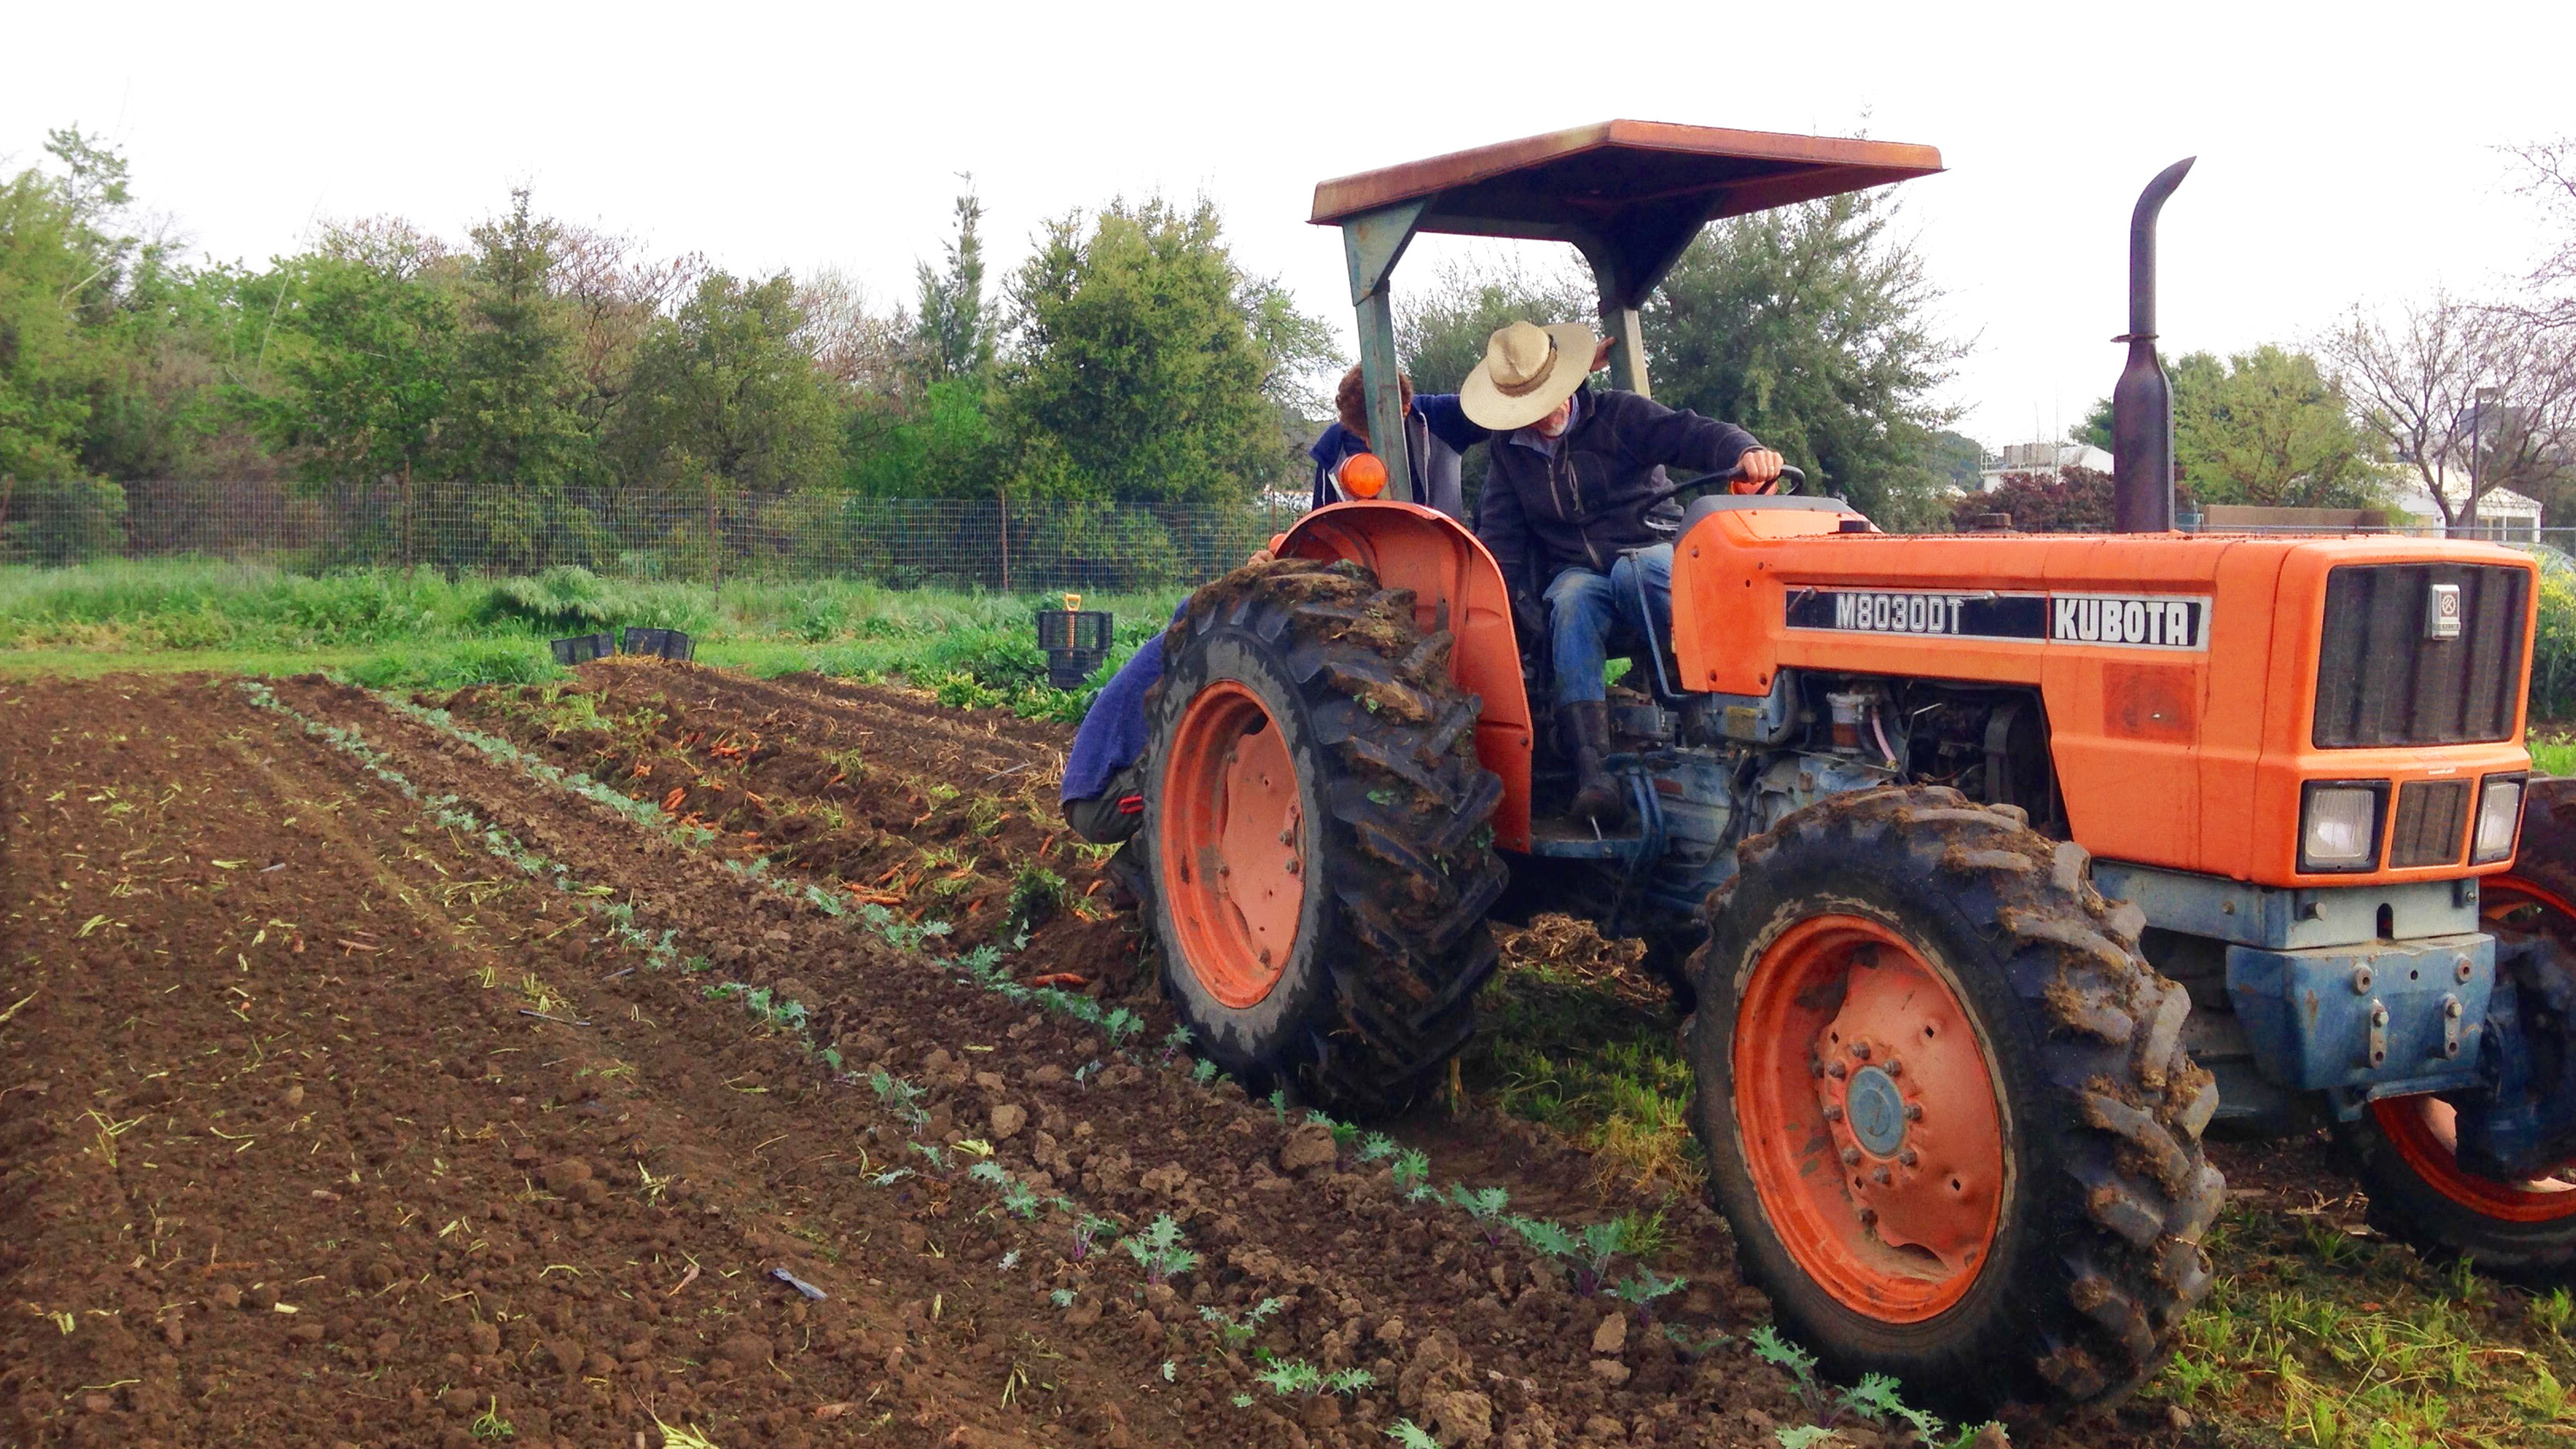 Agricultural work on the UC Davis Student Farm